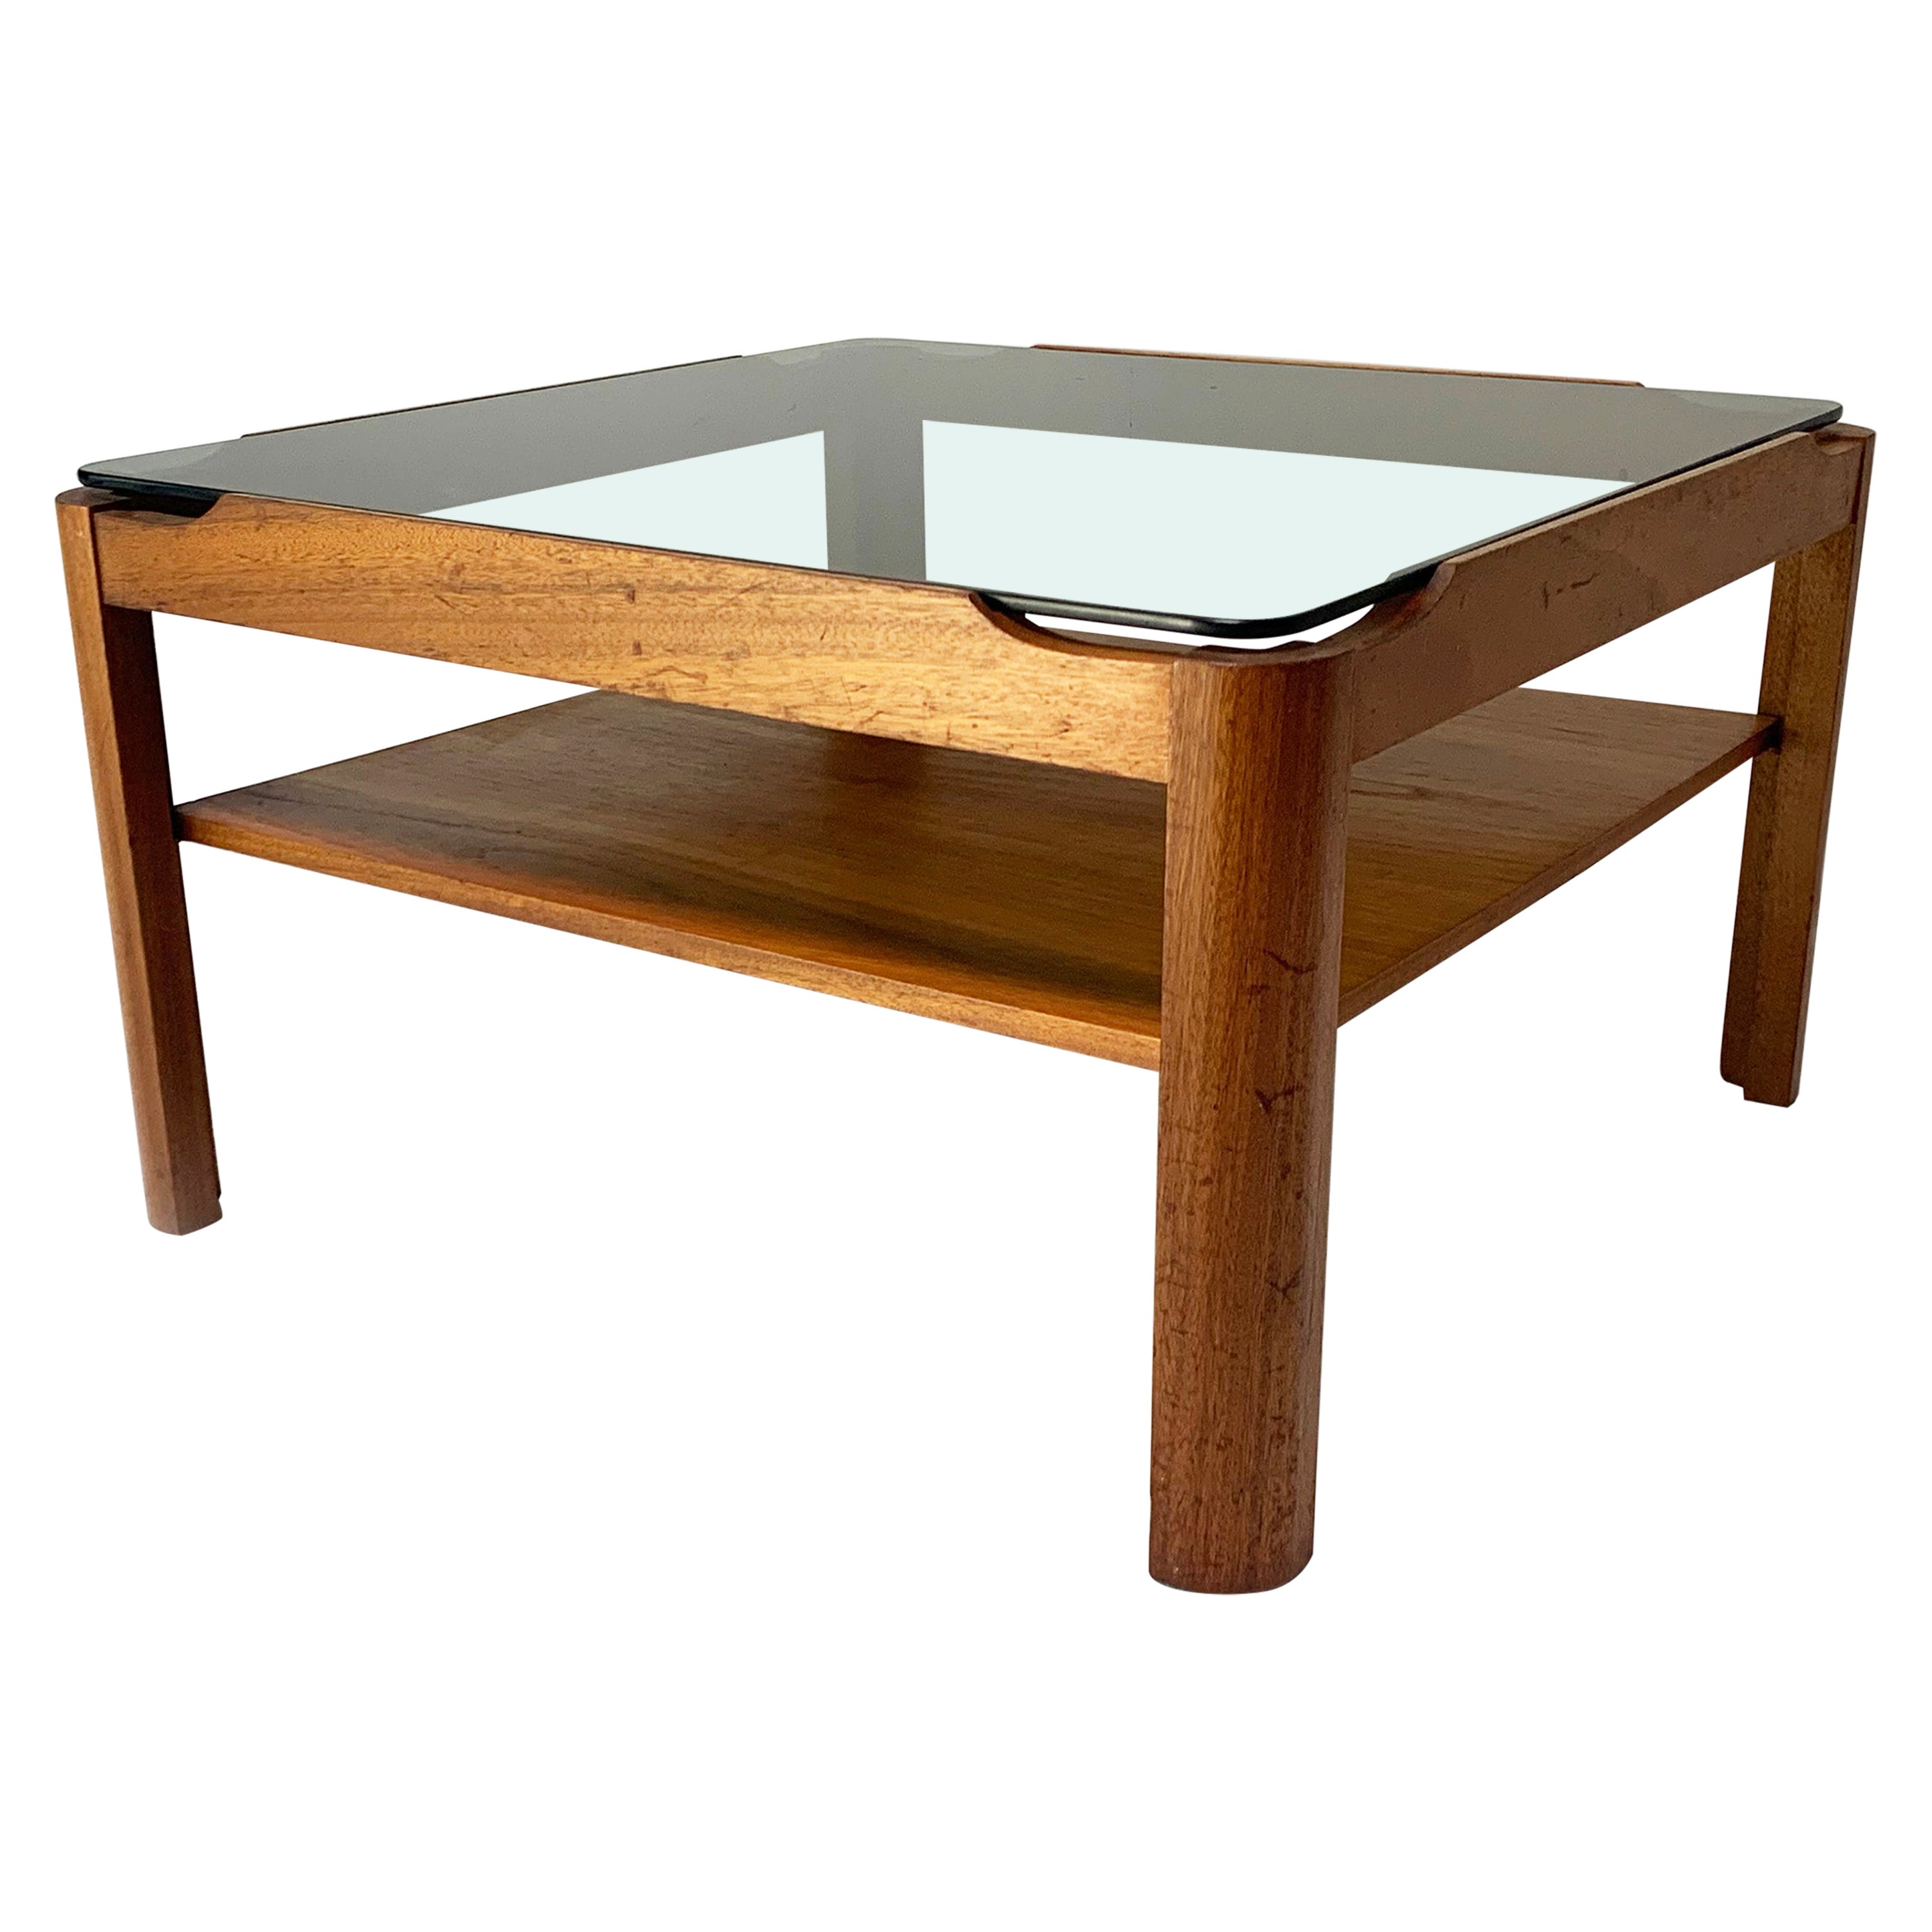 1960’s, Mid-Century English Solid Teak Coffee Table by Myer For Sale